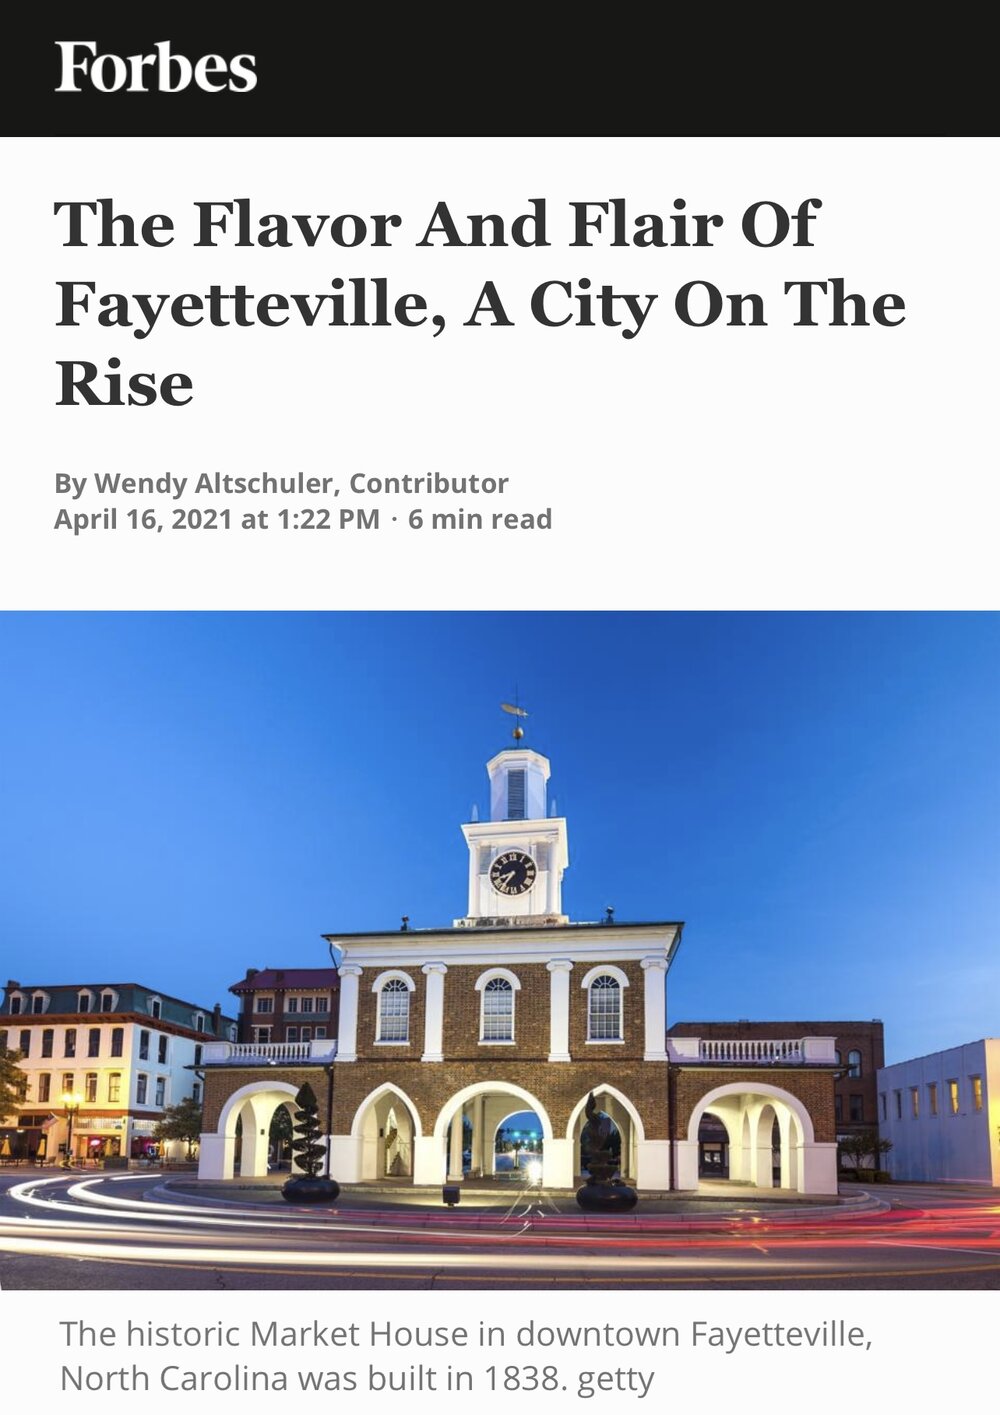 The Flavor And Flair Of Fayetteville, A City On The Rise